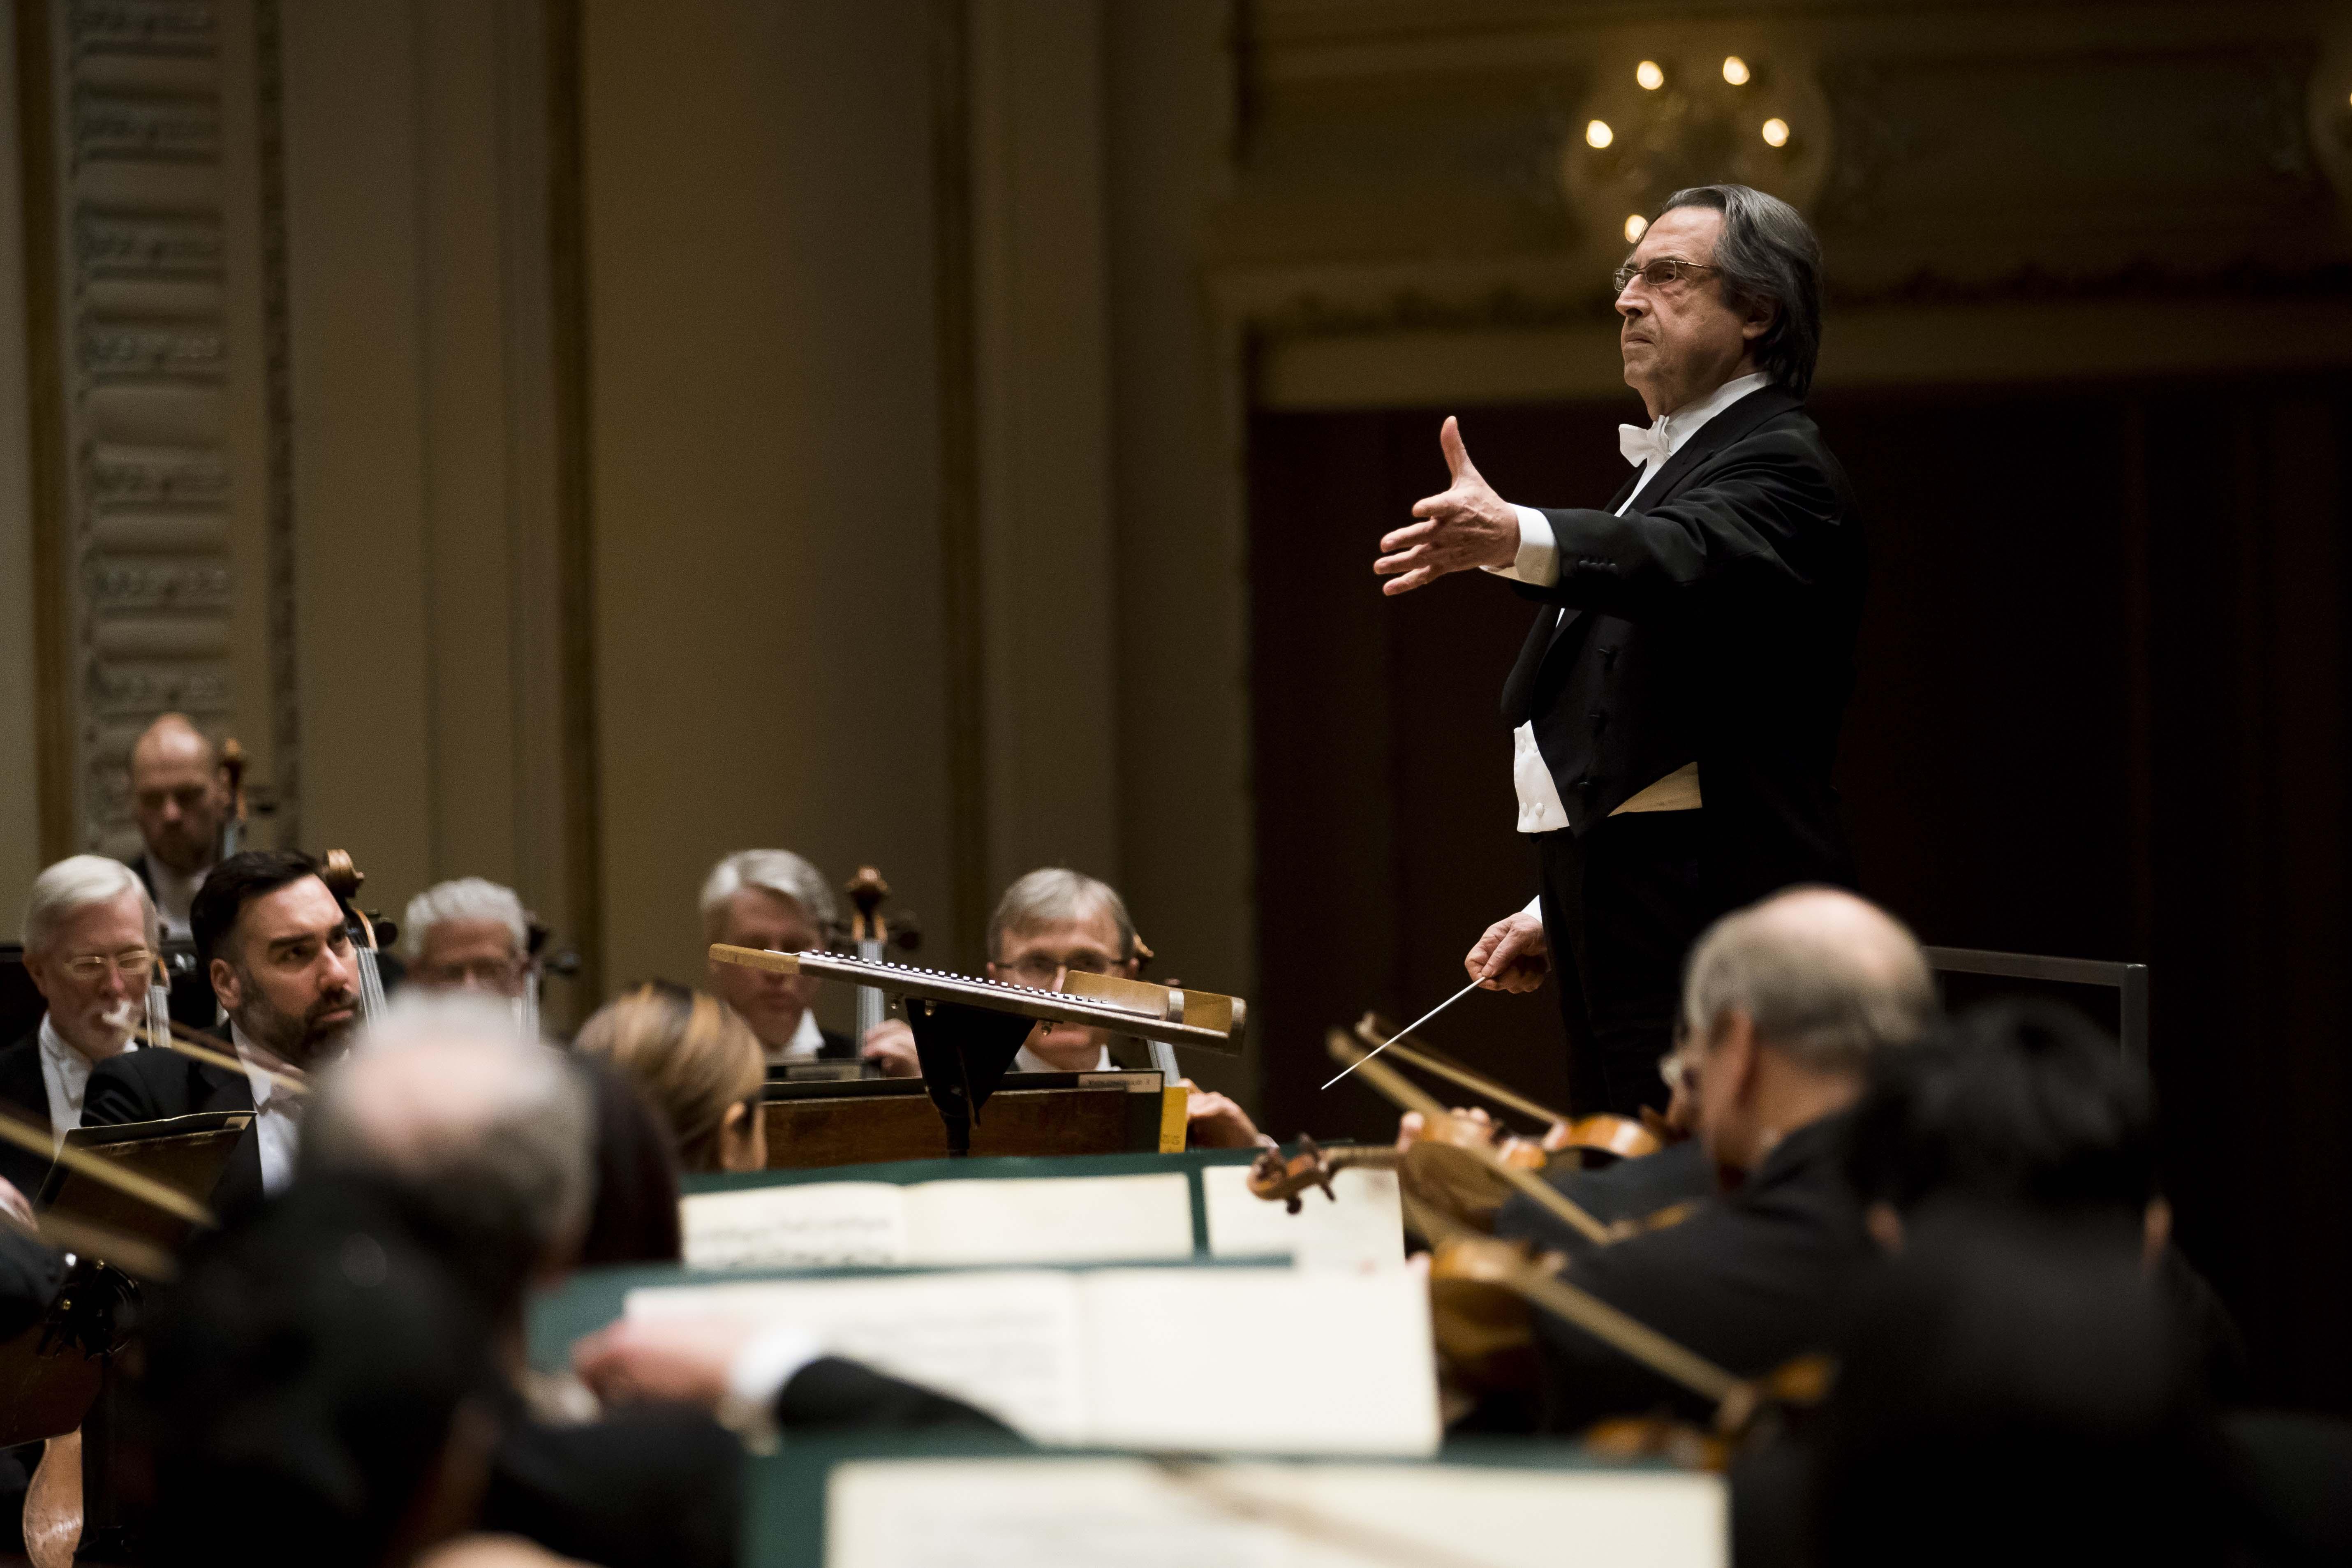 Music director Riccardo Muti leads the CSO in Weber’s Overture to “Oberon.” (Credit: Todd Rosenberg)